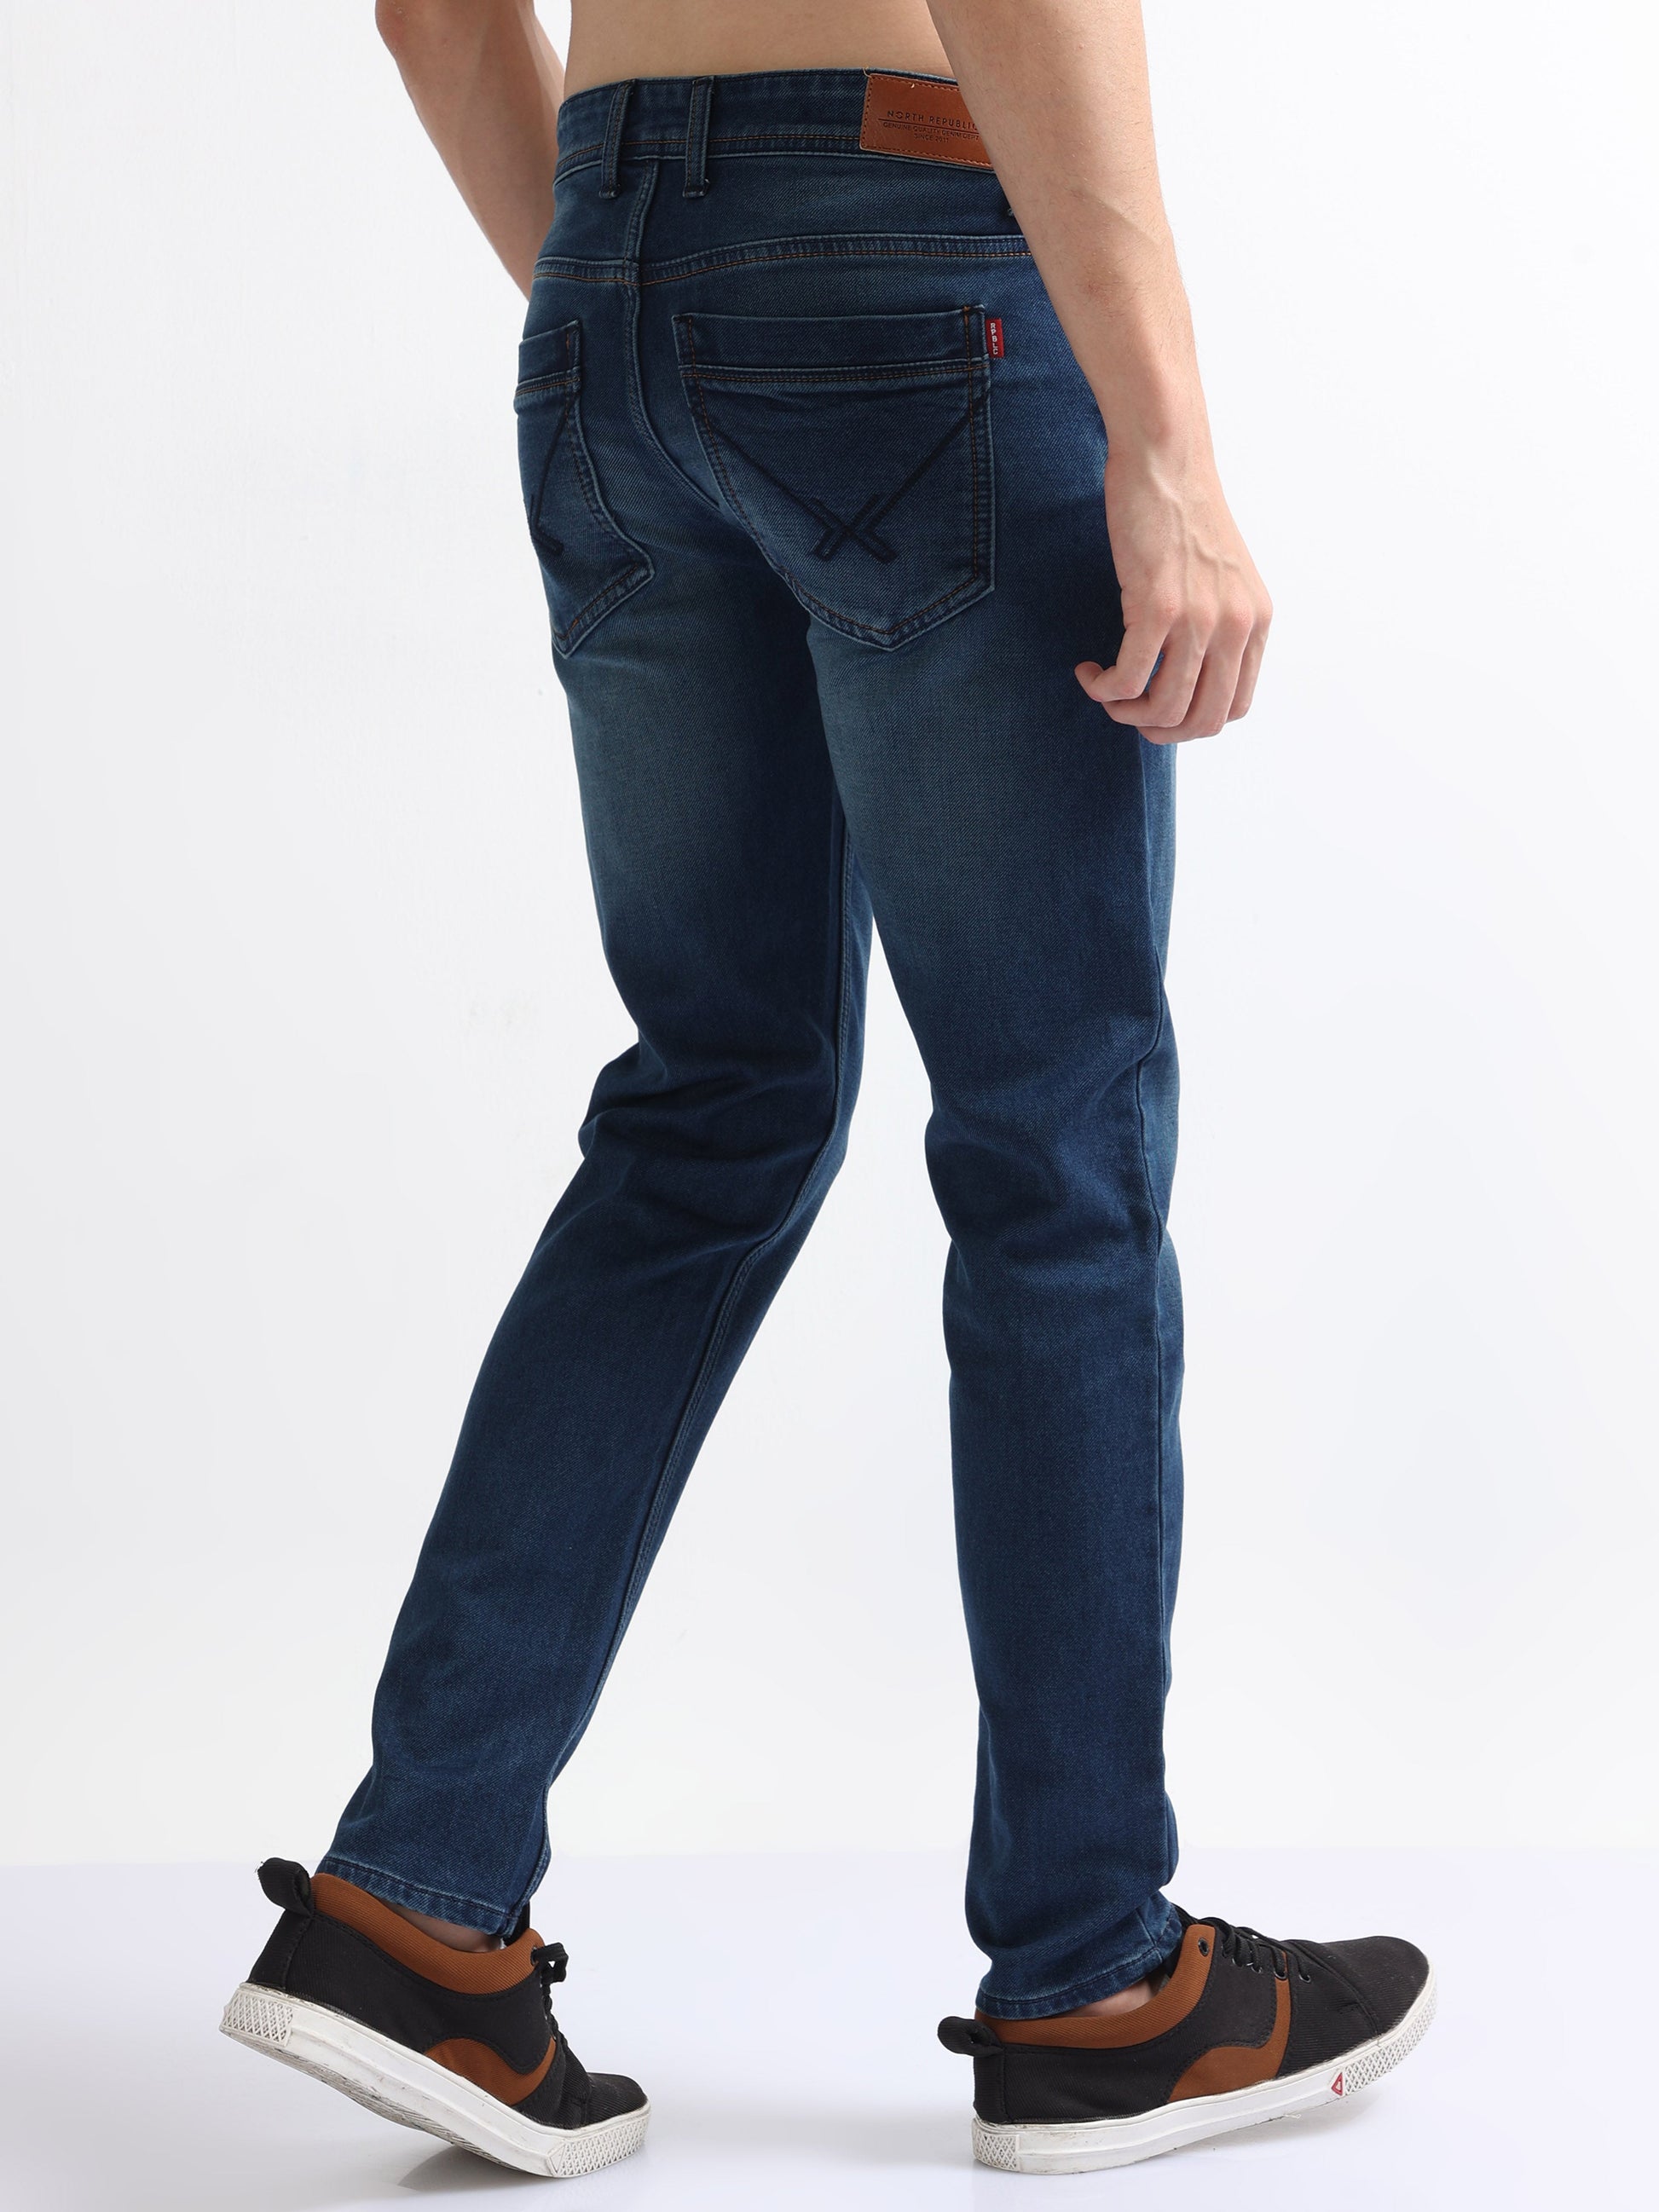 Buy Washed Stretch Jeans Online.